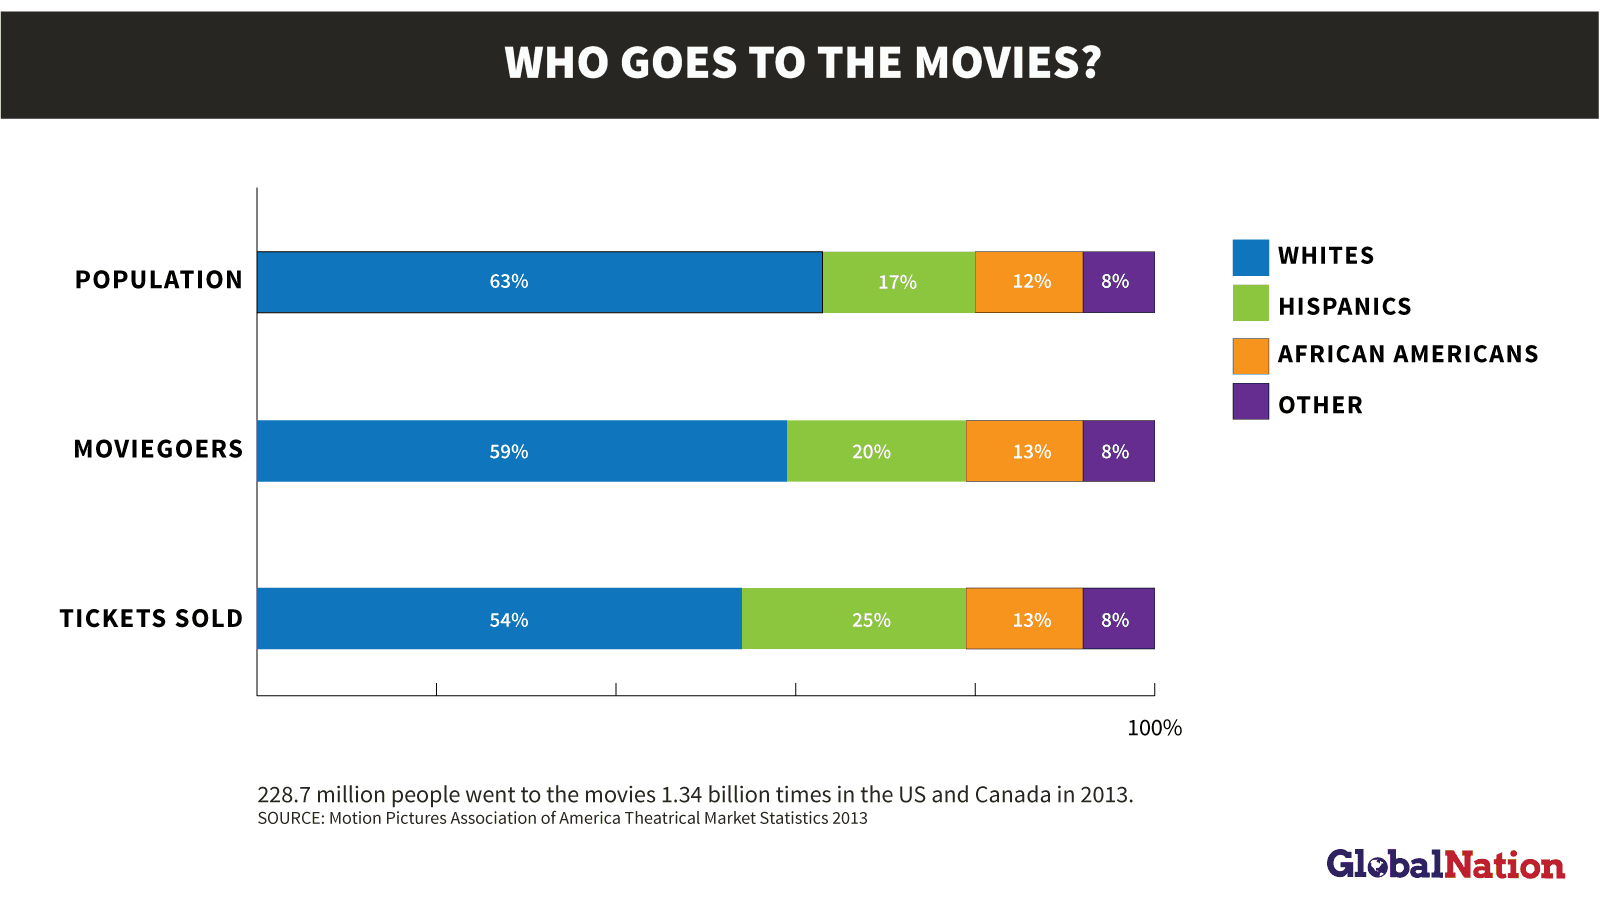 Who goes to the movies? Data from the MPAA